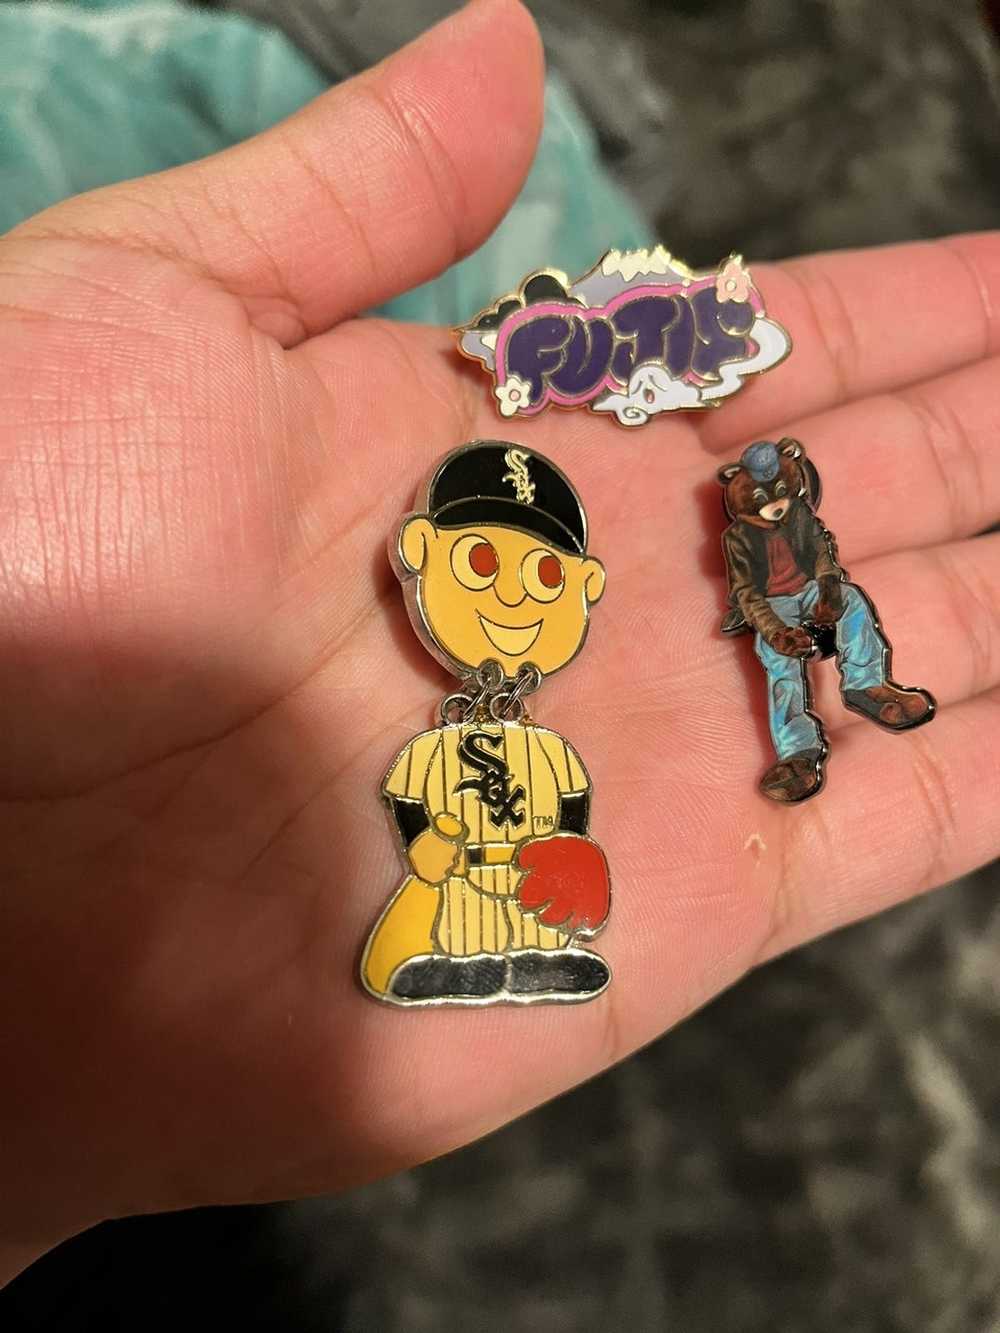 Hat Club × MLB × Pins HatClub Pin and others. - image 1